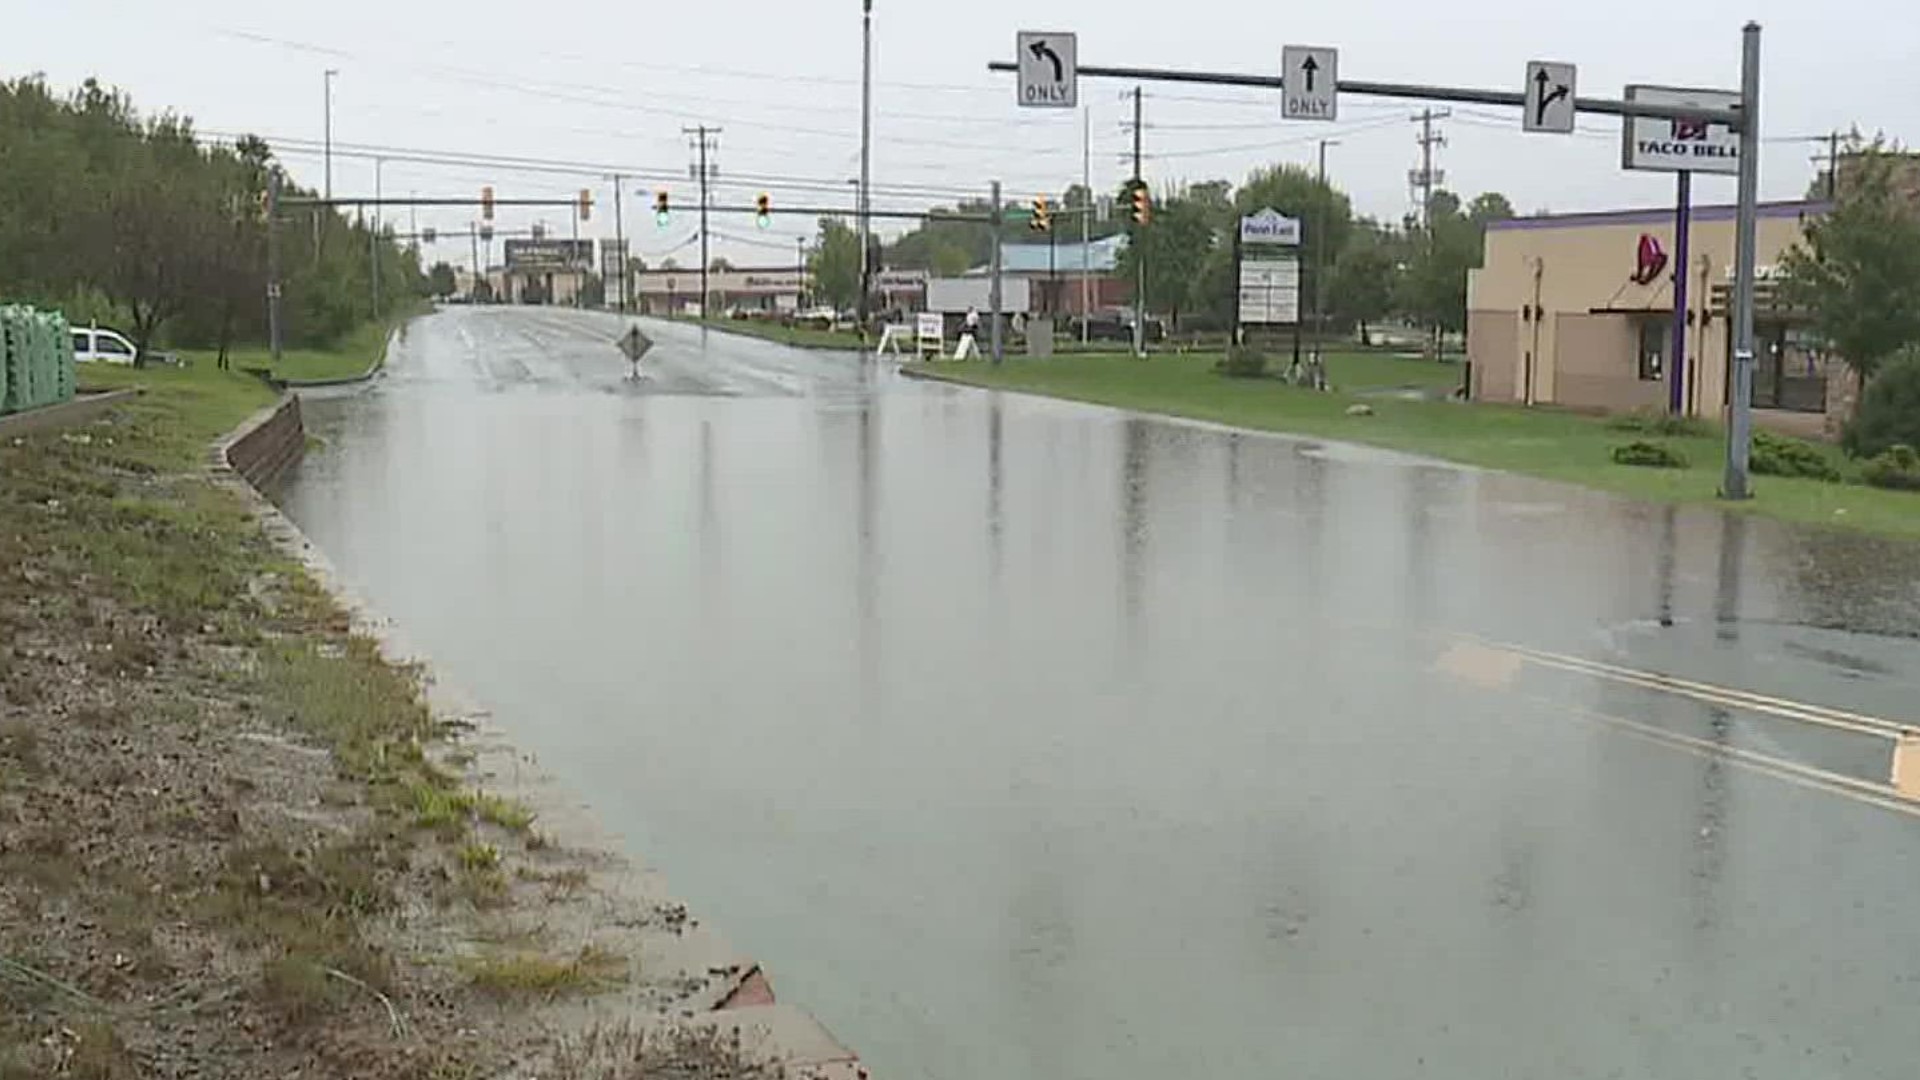 Part of a heavily traveled road in Lackawanna County is closed because of flooding.